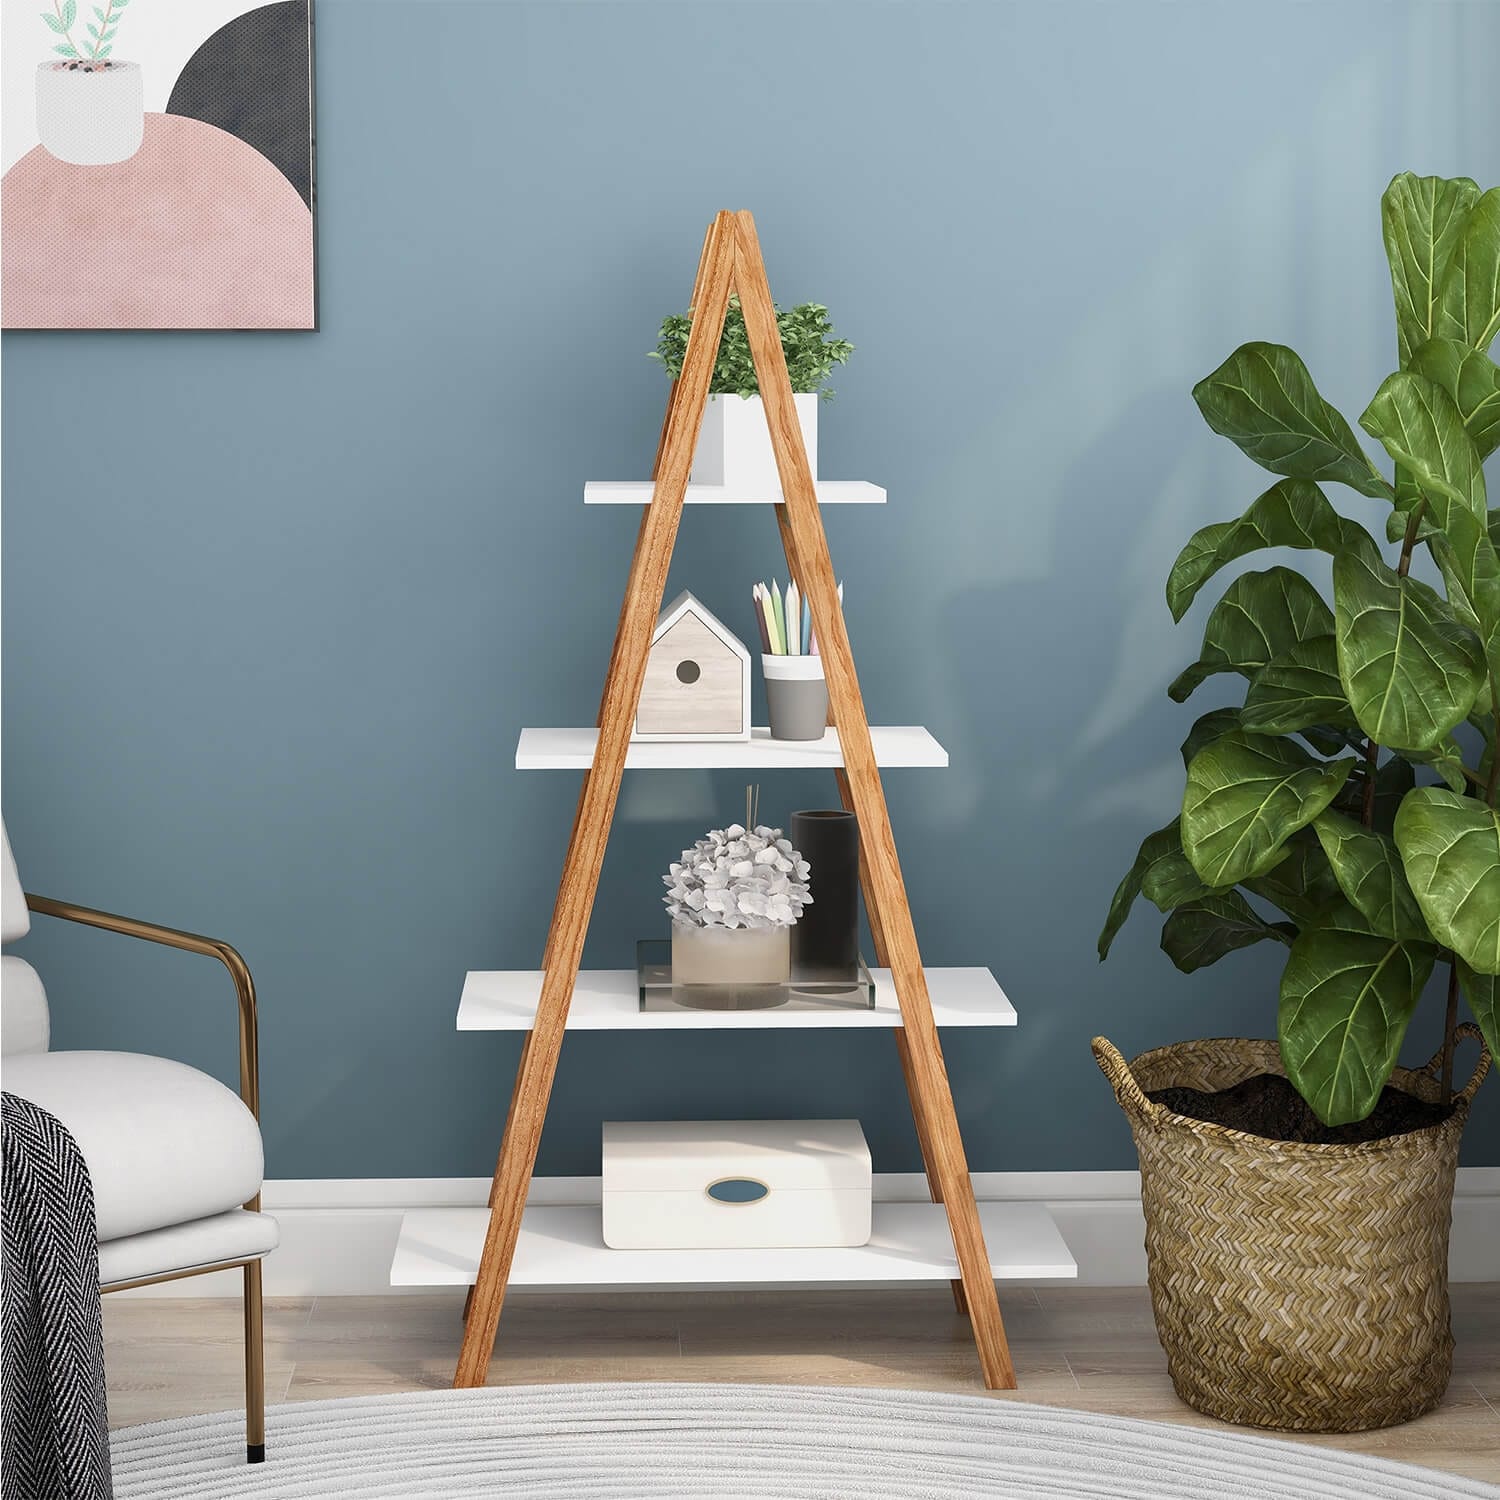 https://ak1.ostkcdn.com/images/products/is/images/direct/b51de670be0687f32796ff0a985531ad3a9dcfd4/4-Tier-A-Frame-Ladder-Shelf-53.54%22H-white-ladder-shelf-book-display-shelf-with-Bamboo-Wood-plant-ladder-small-ladder-shelf.jpg